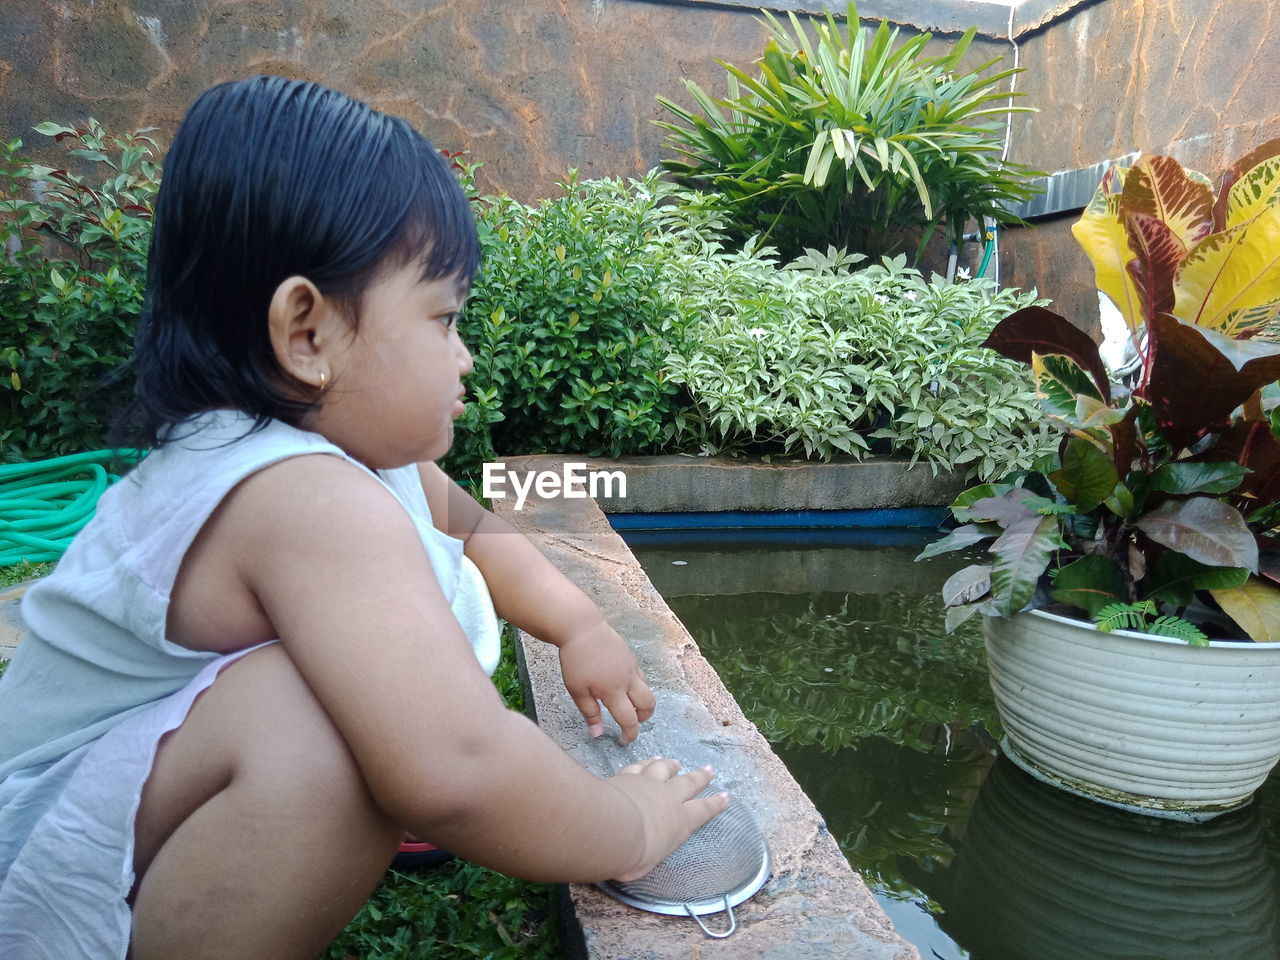 GIRL LOOKING AT POTTED PLANT IN BACKYARD